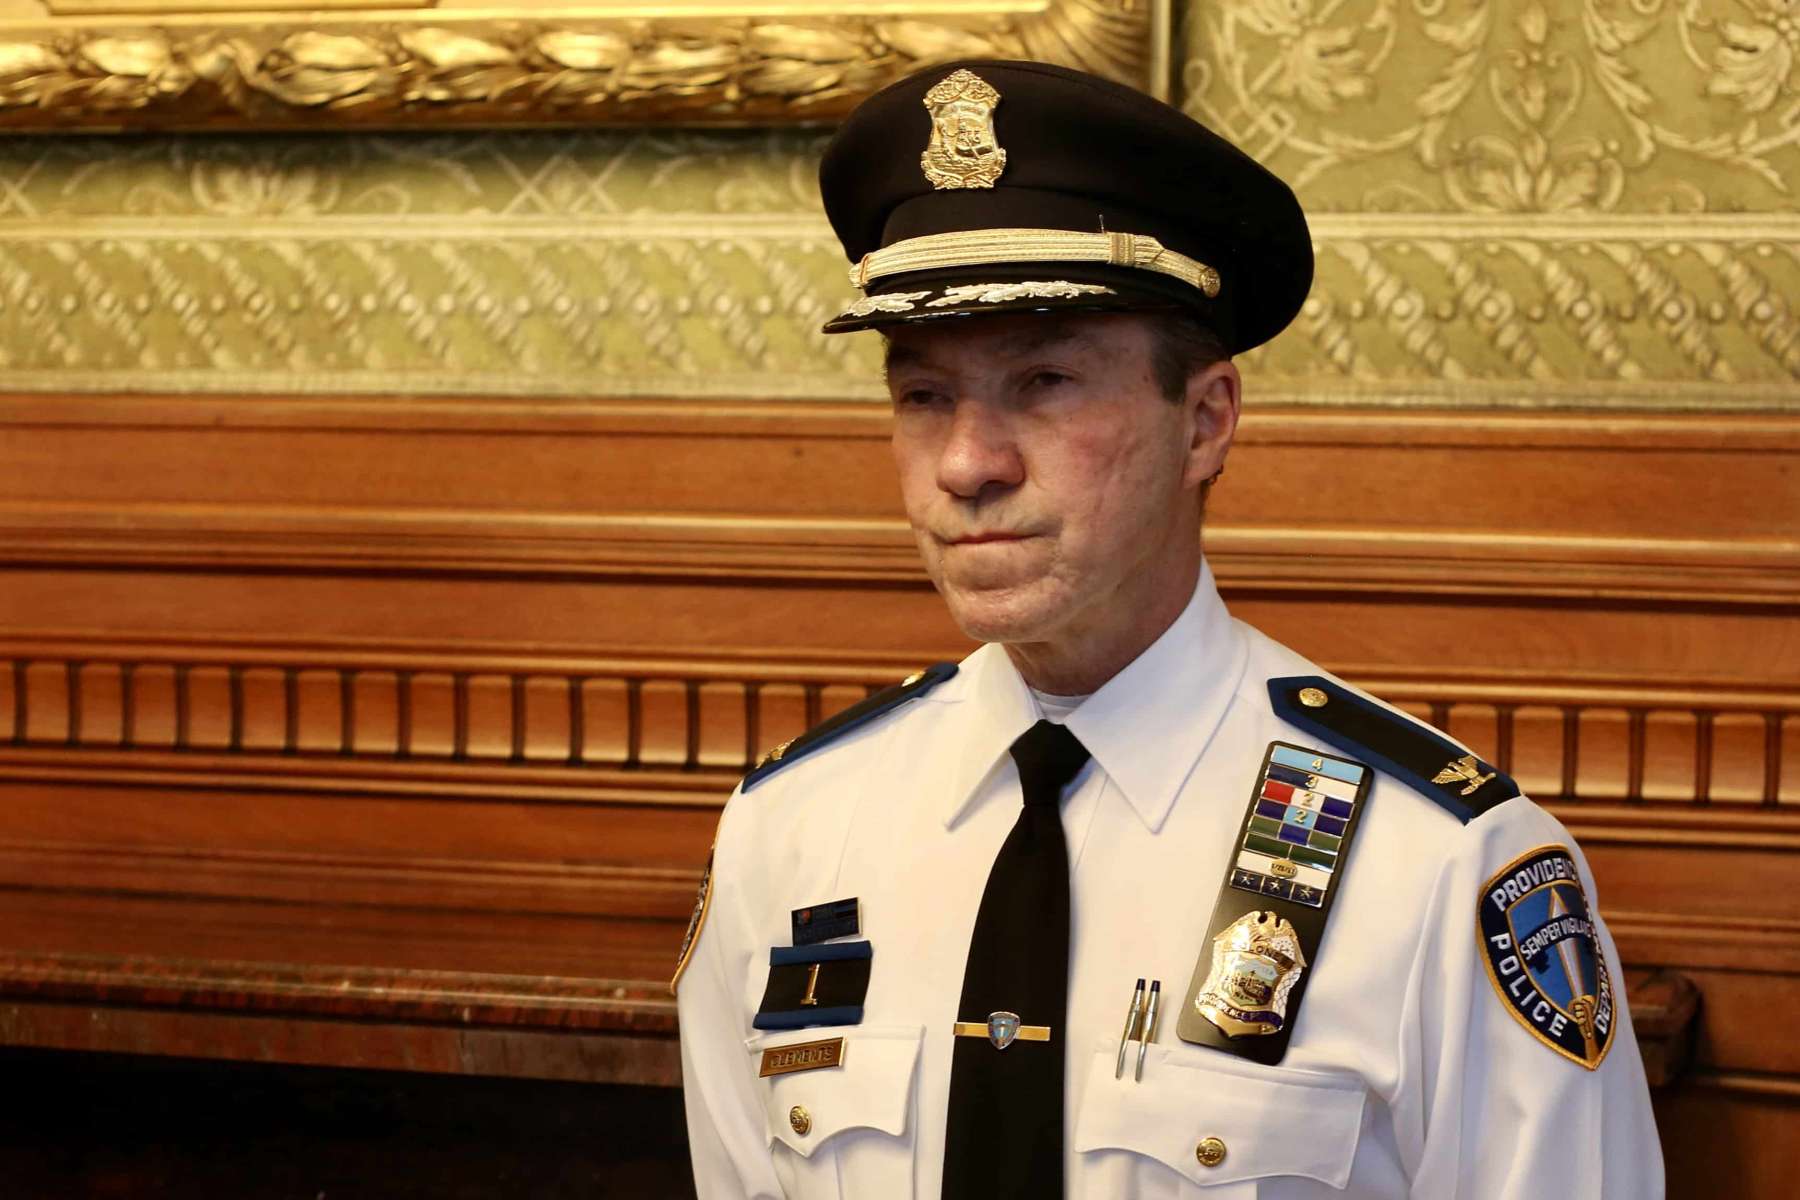 The search for the next Providence Police Chief begins